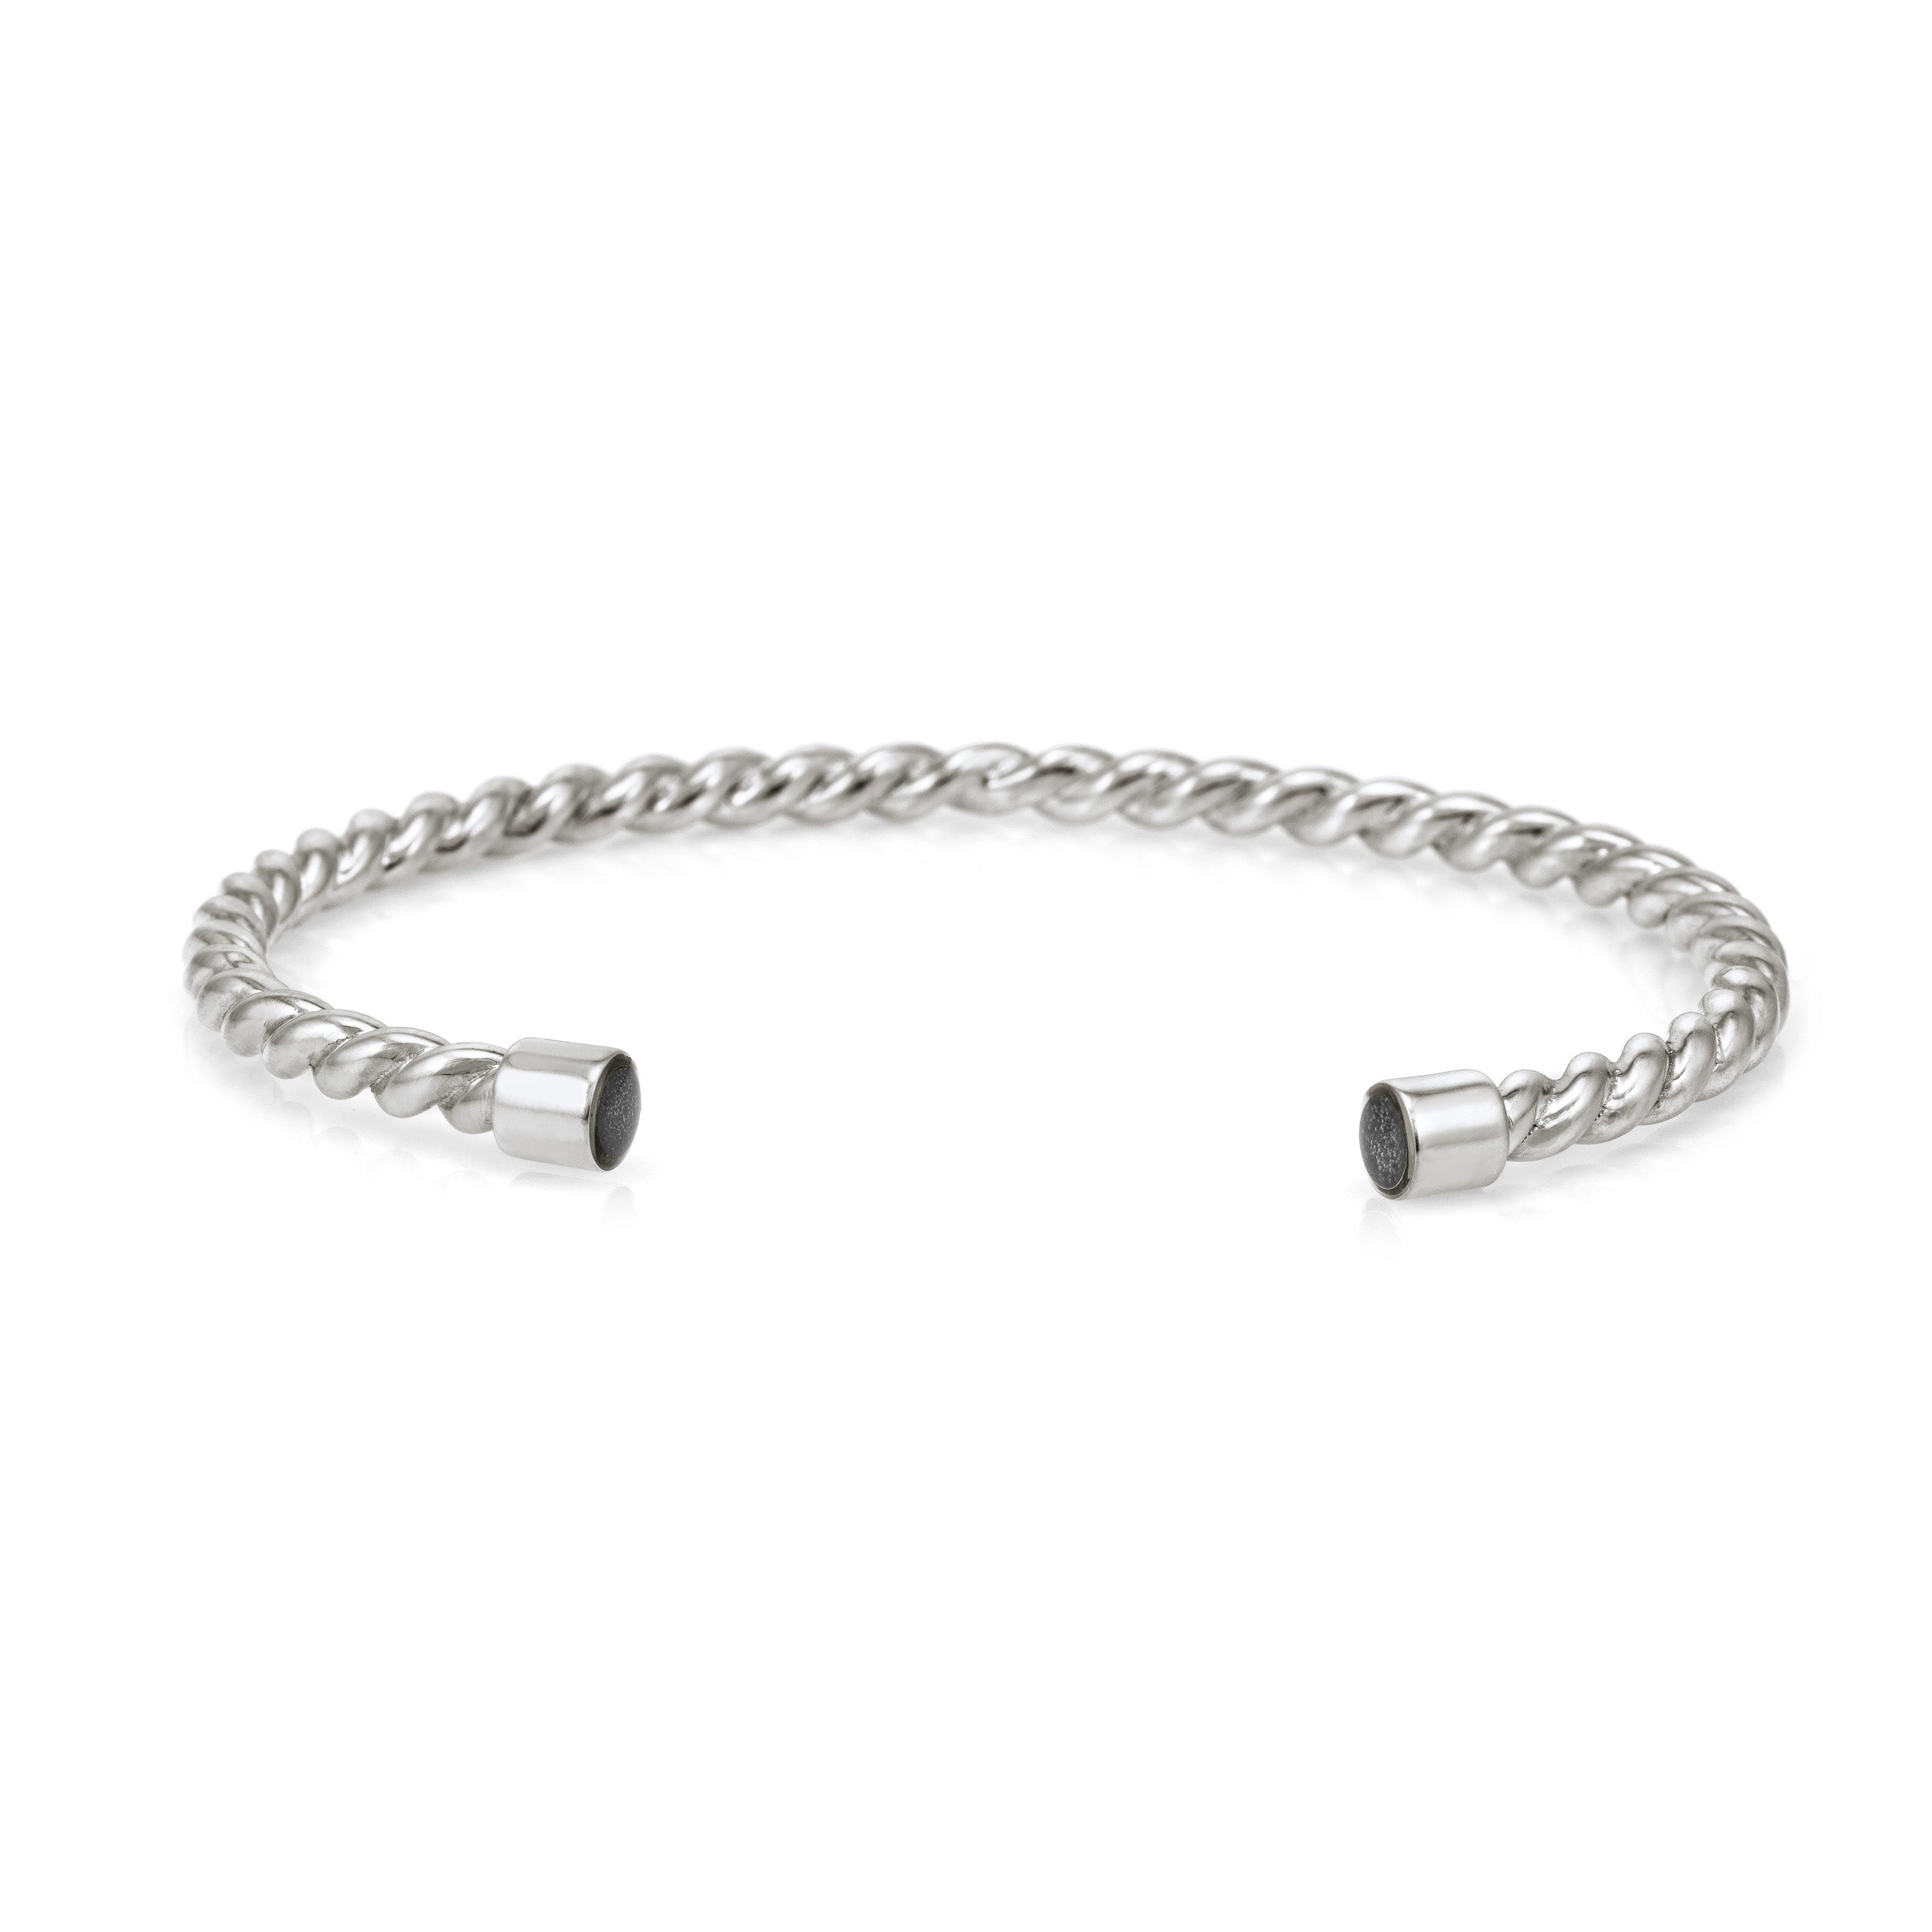 Personalized Mens Cremation Bracelet For Ashes Silver Plated